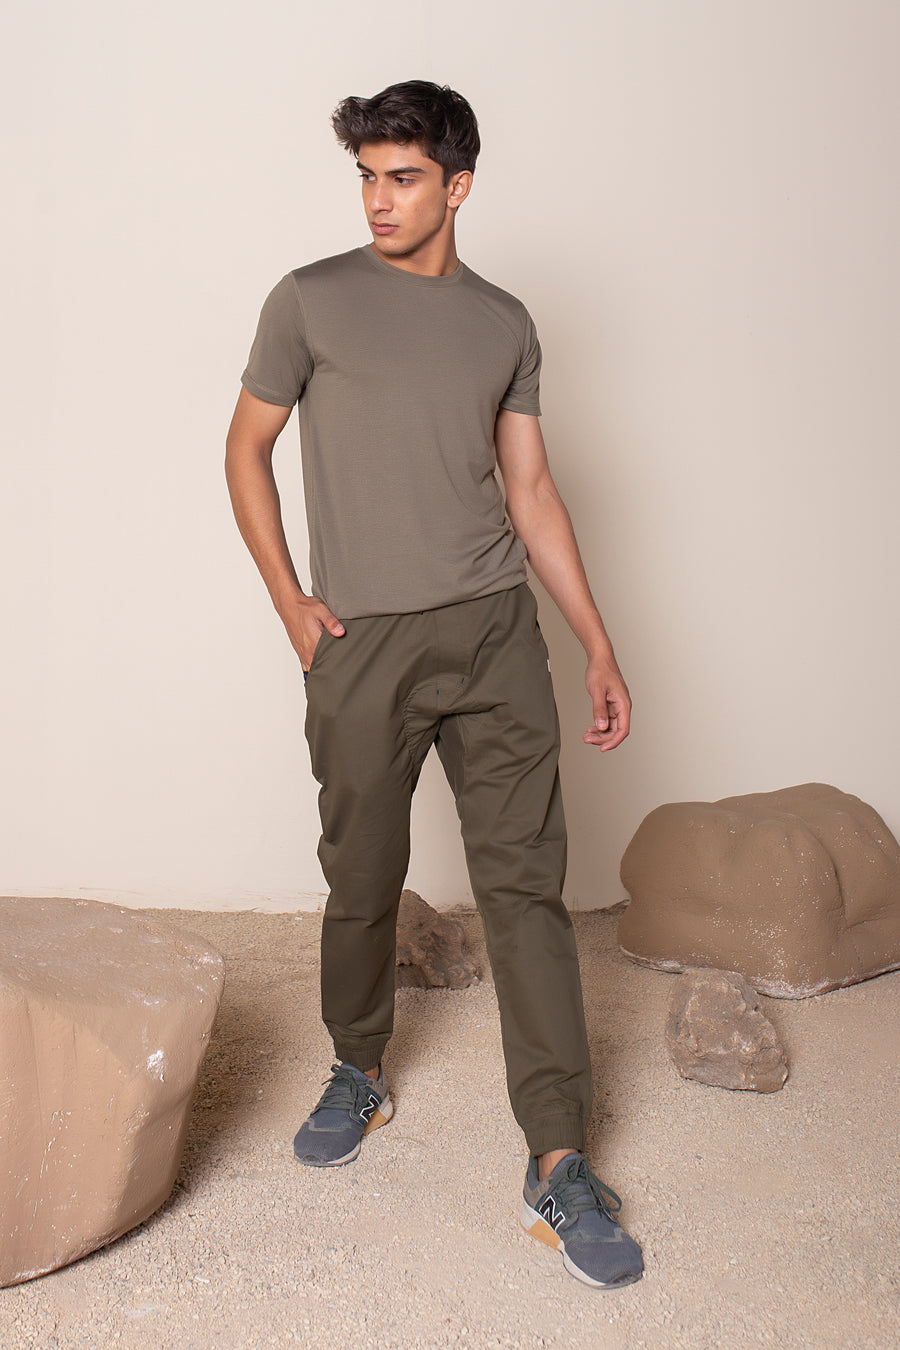 Distressed Olive Green Joggers | Social + Co Boutique